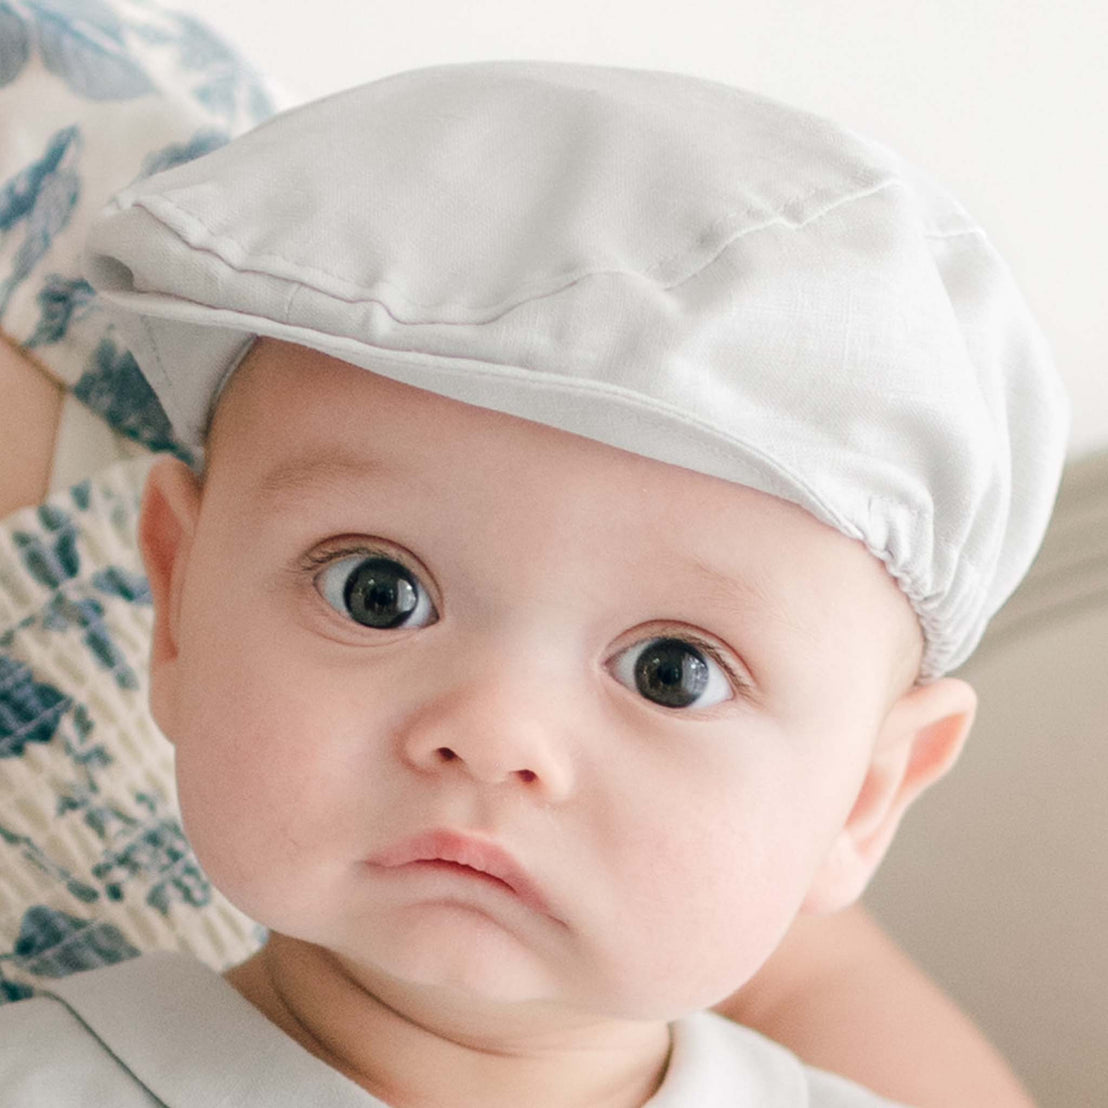 A baby wearing a Grayson Linen Newsboy Cap is looking at the camera. The baby has large eyes and rosy cheeks. Part of an adult's arm and patterned clothing are visible in the background.